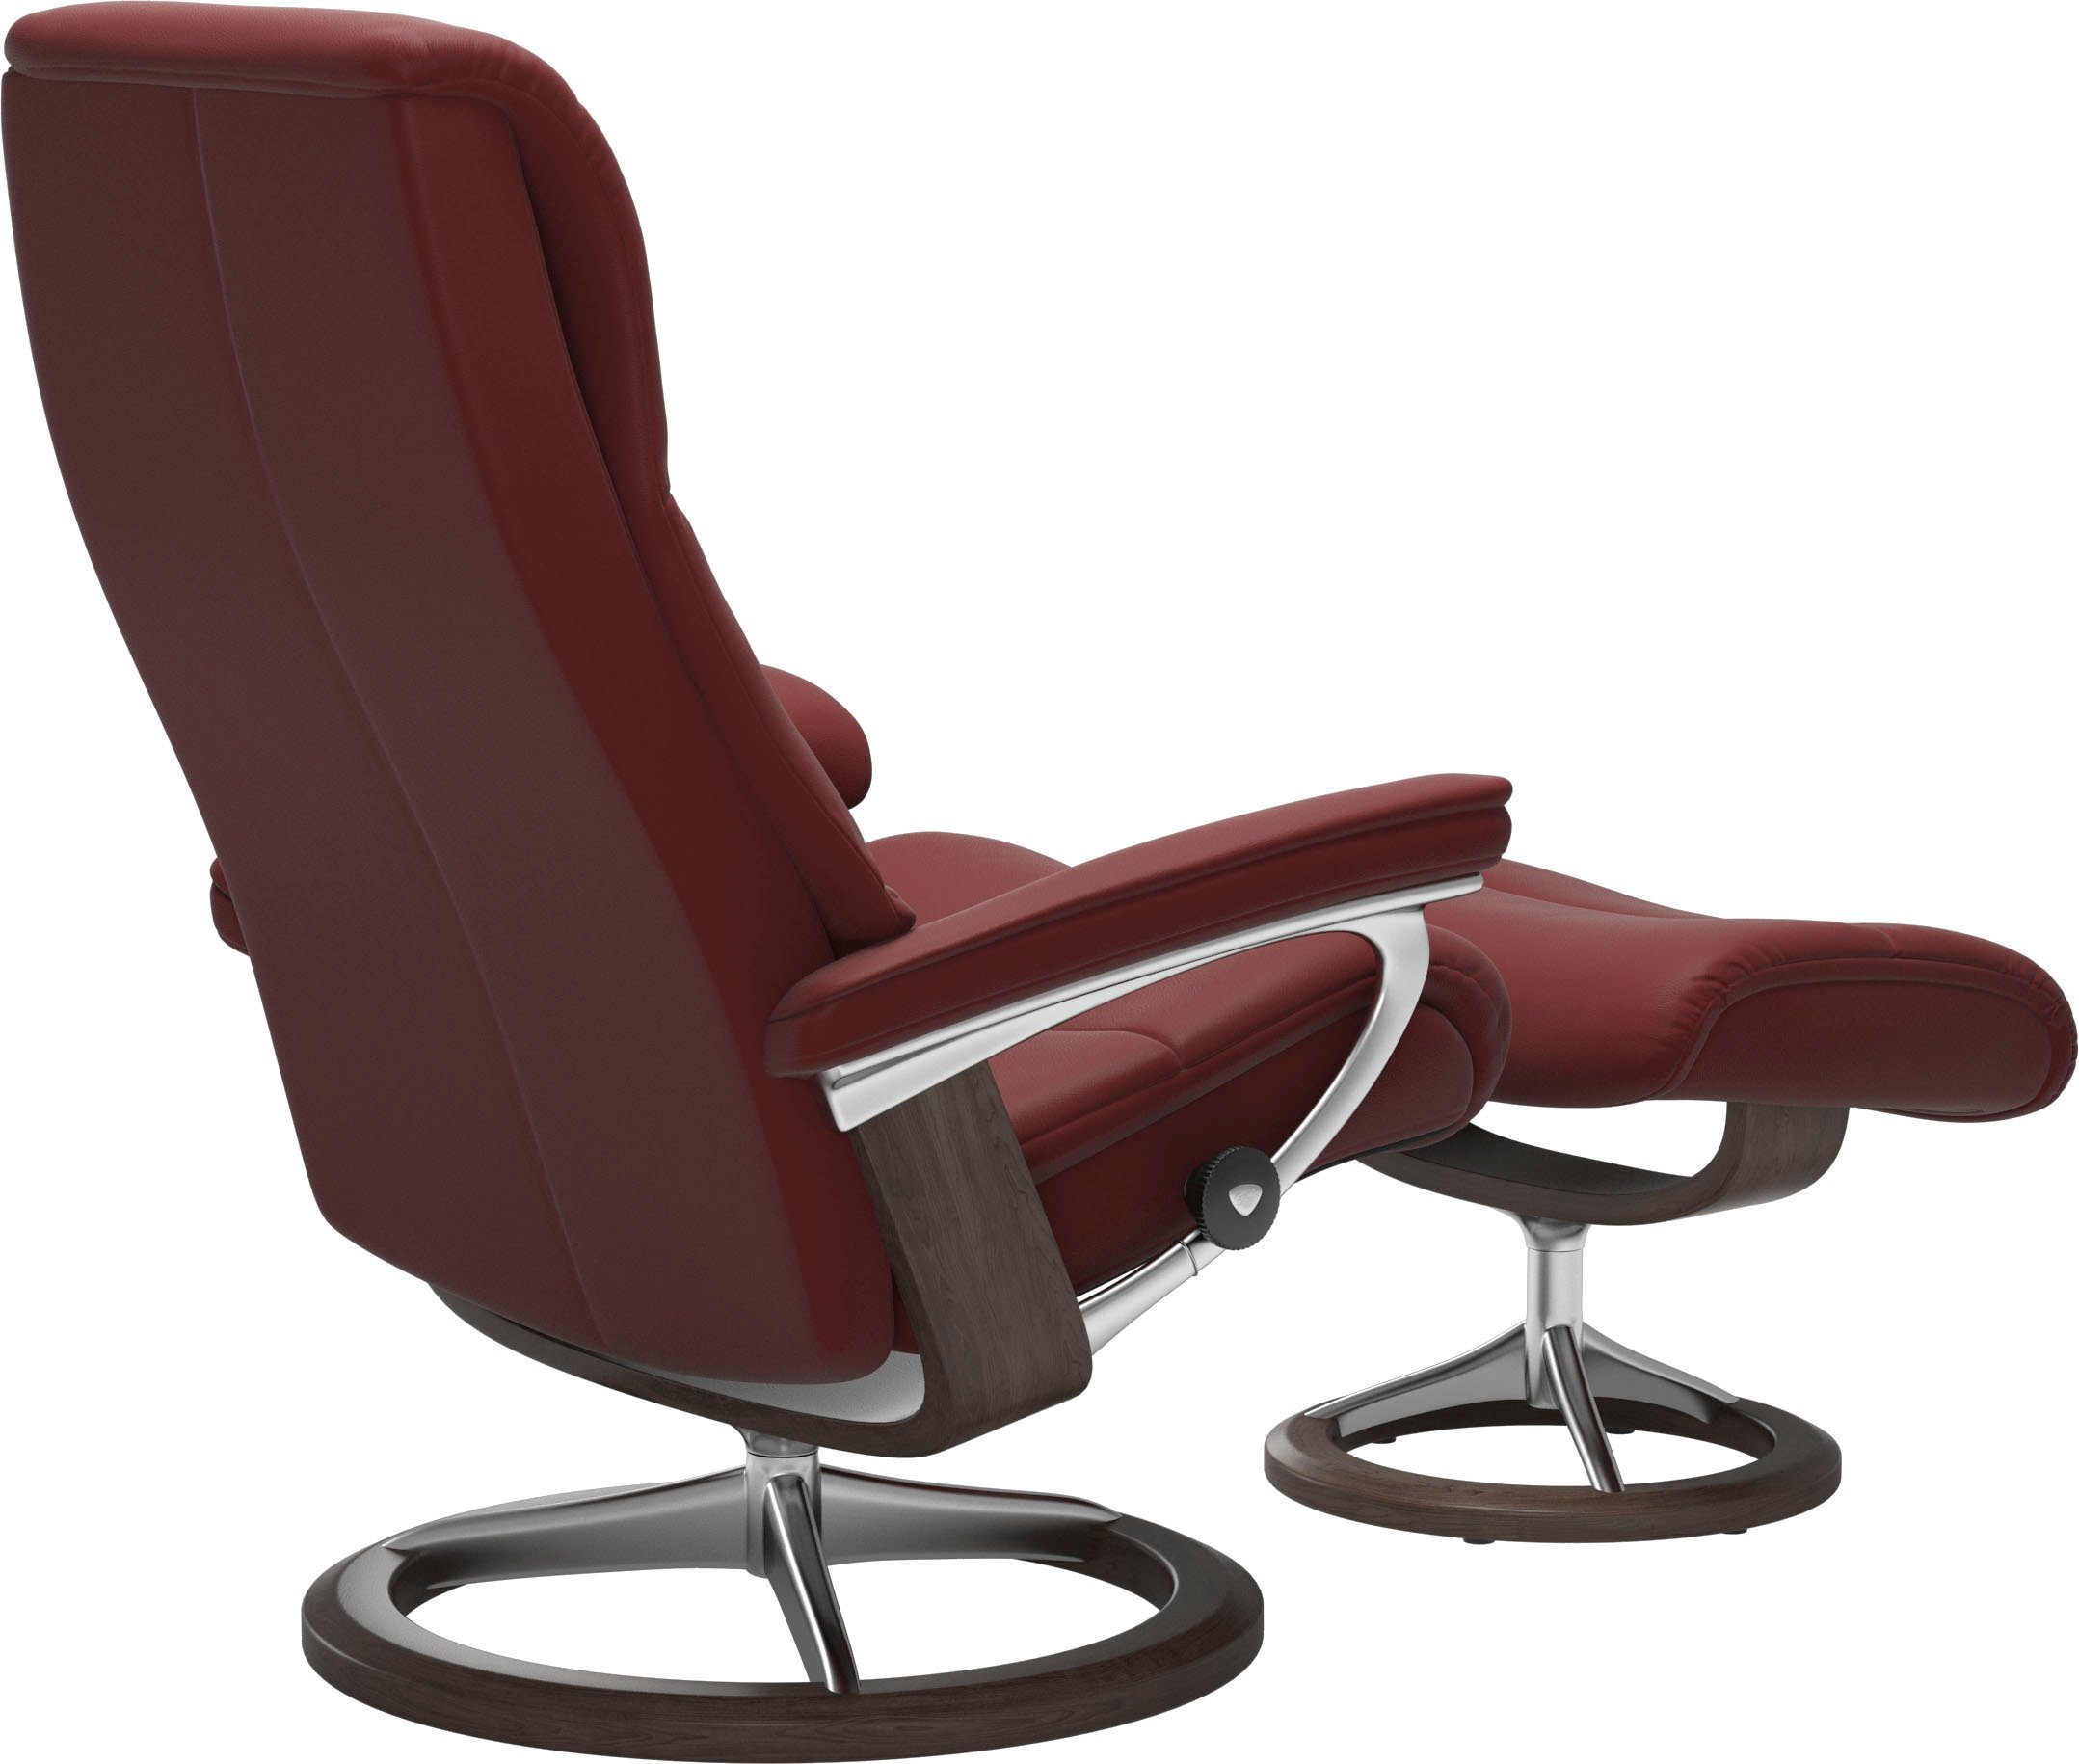 Signature S,Gestell View, Relaxsessel Stressless® Größe mit Base, Wenge